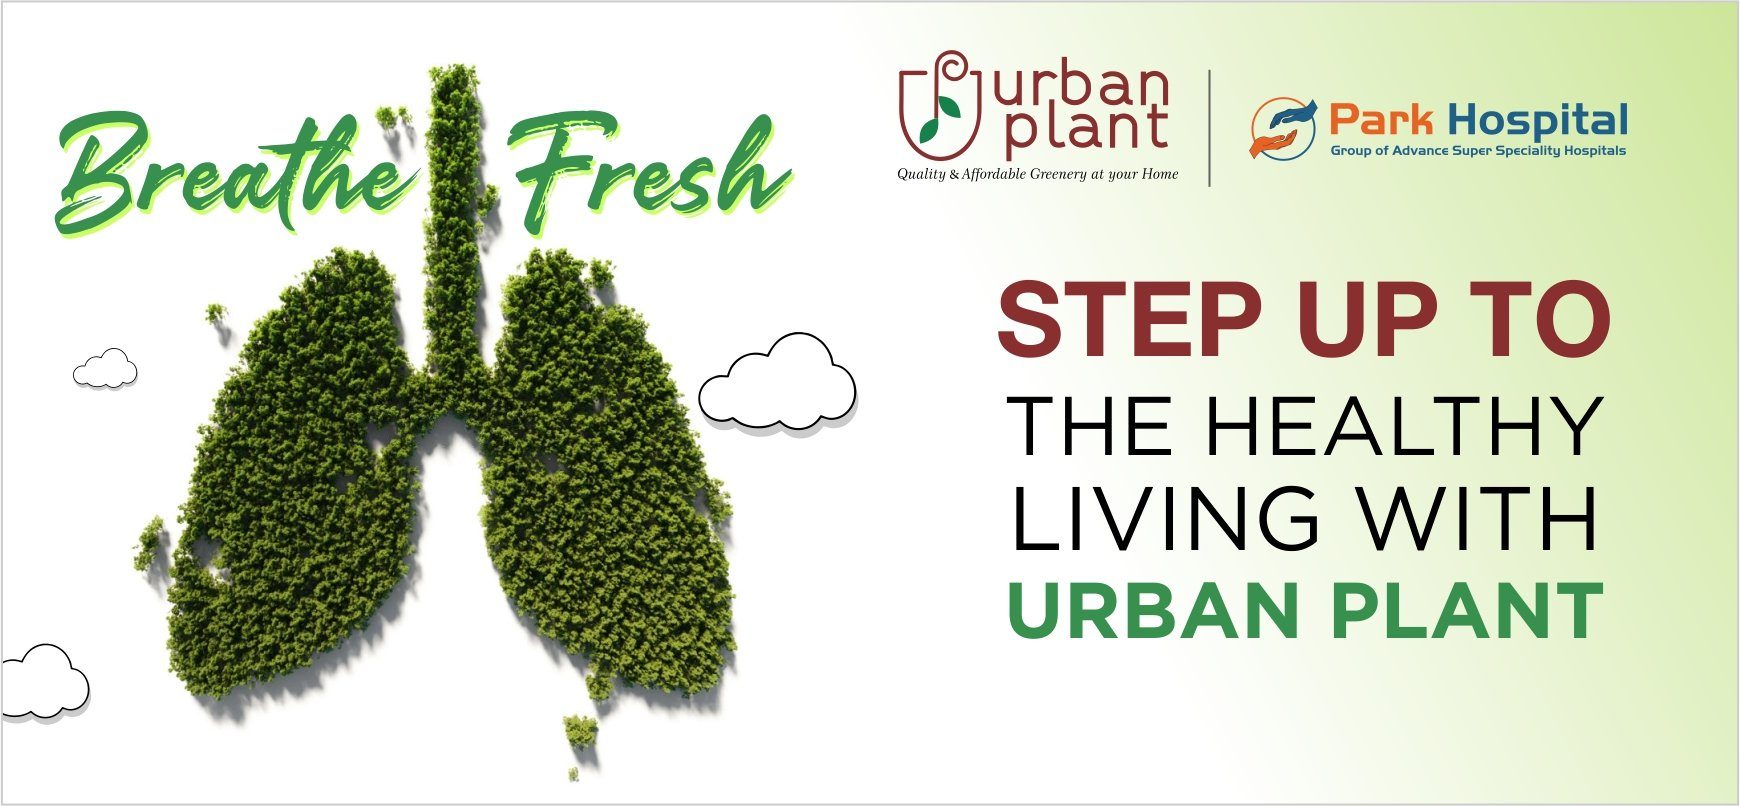 Step up to the Healthy Living with Urban Plants